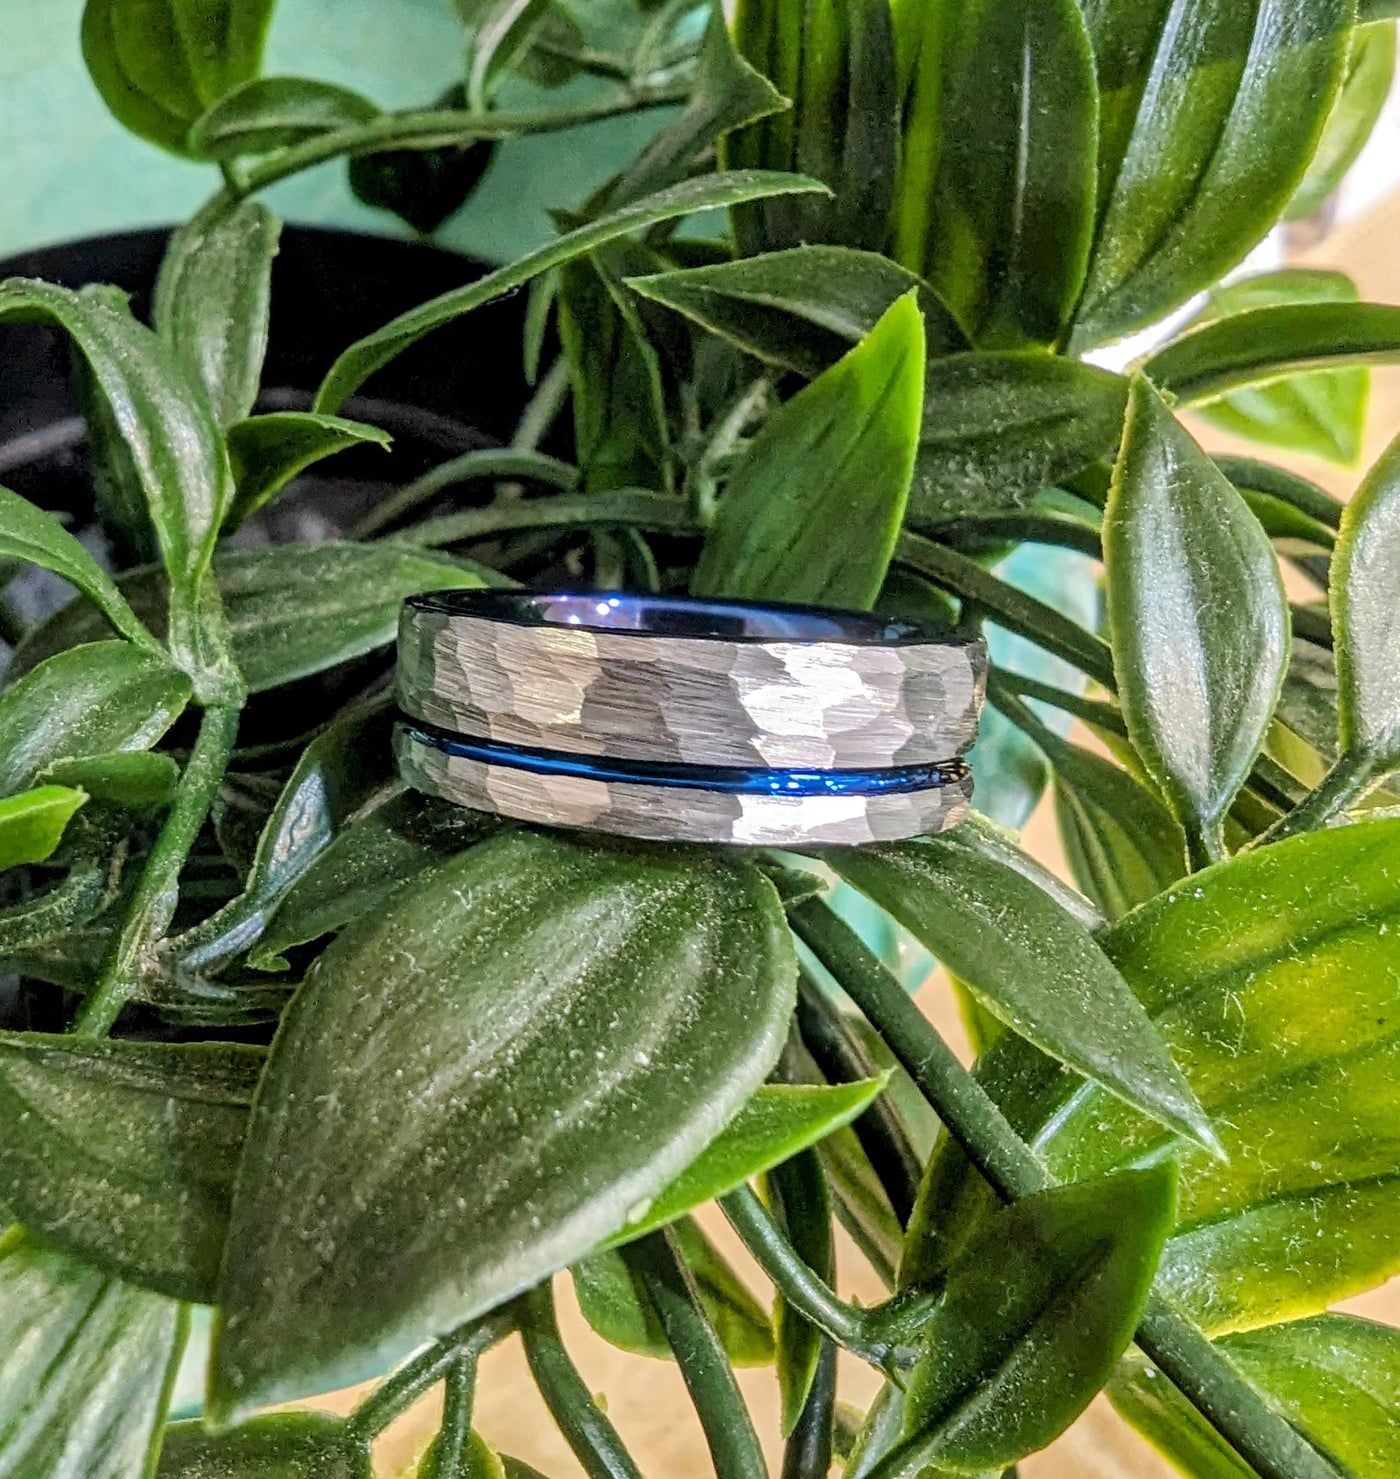 Unique & Co 7mm Tungsten Carbide Hammered Blue IP Ring - Rococo Jewellery